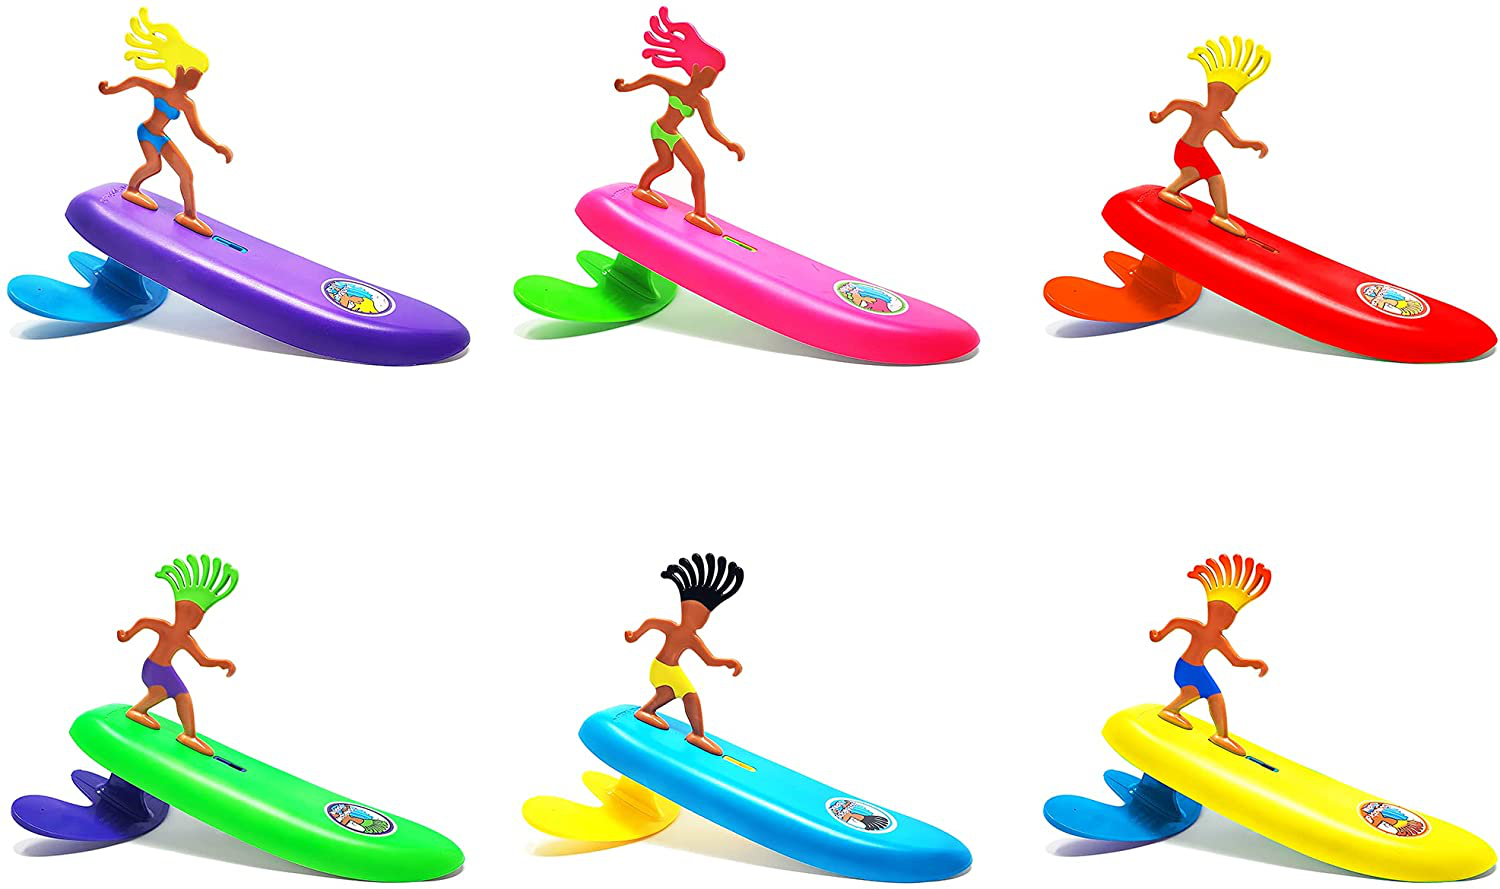 Surfer Dudes Classics Wave Powered Mini-Surfer and Surfboard Toy - Donegan Doolin - Green